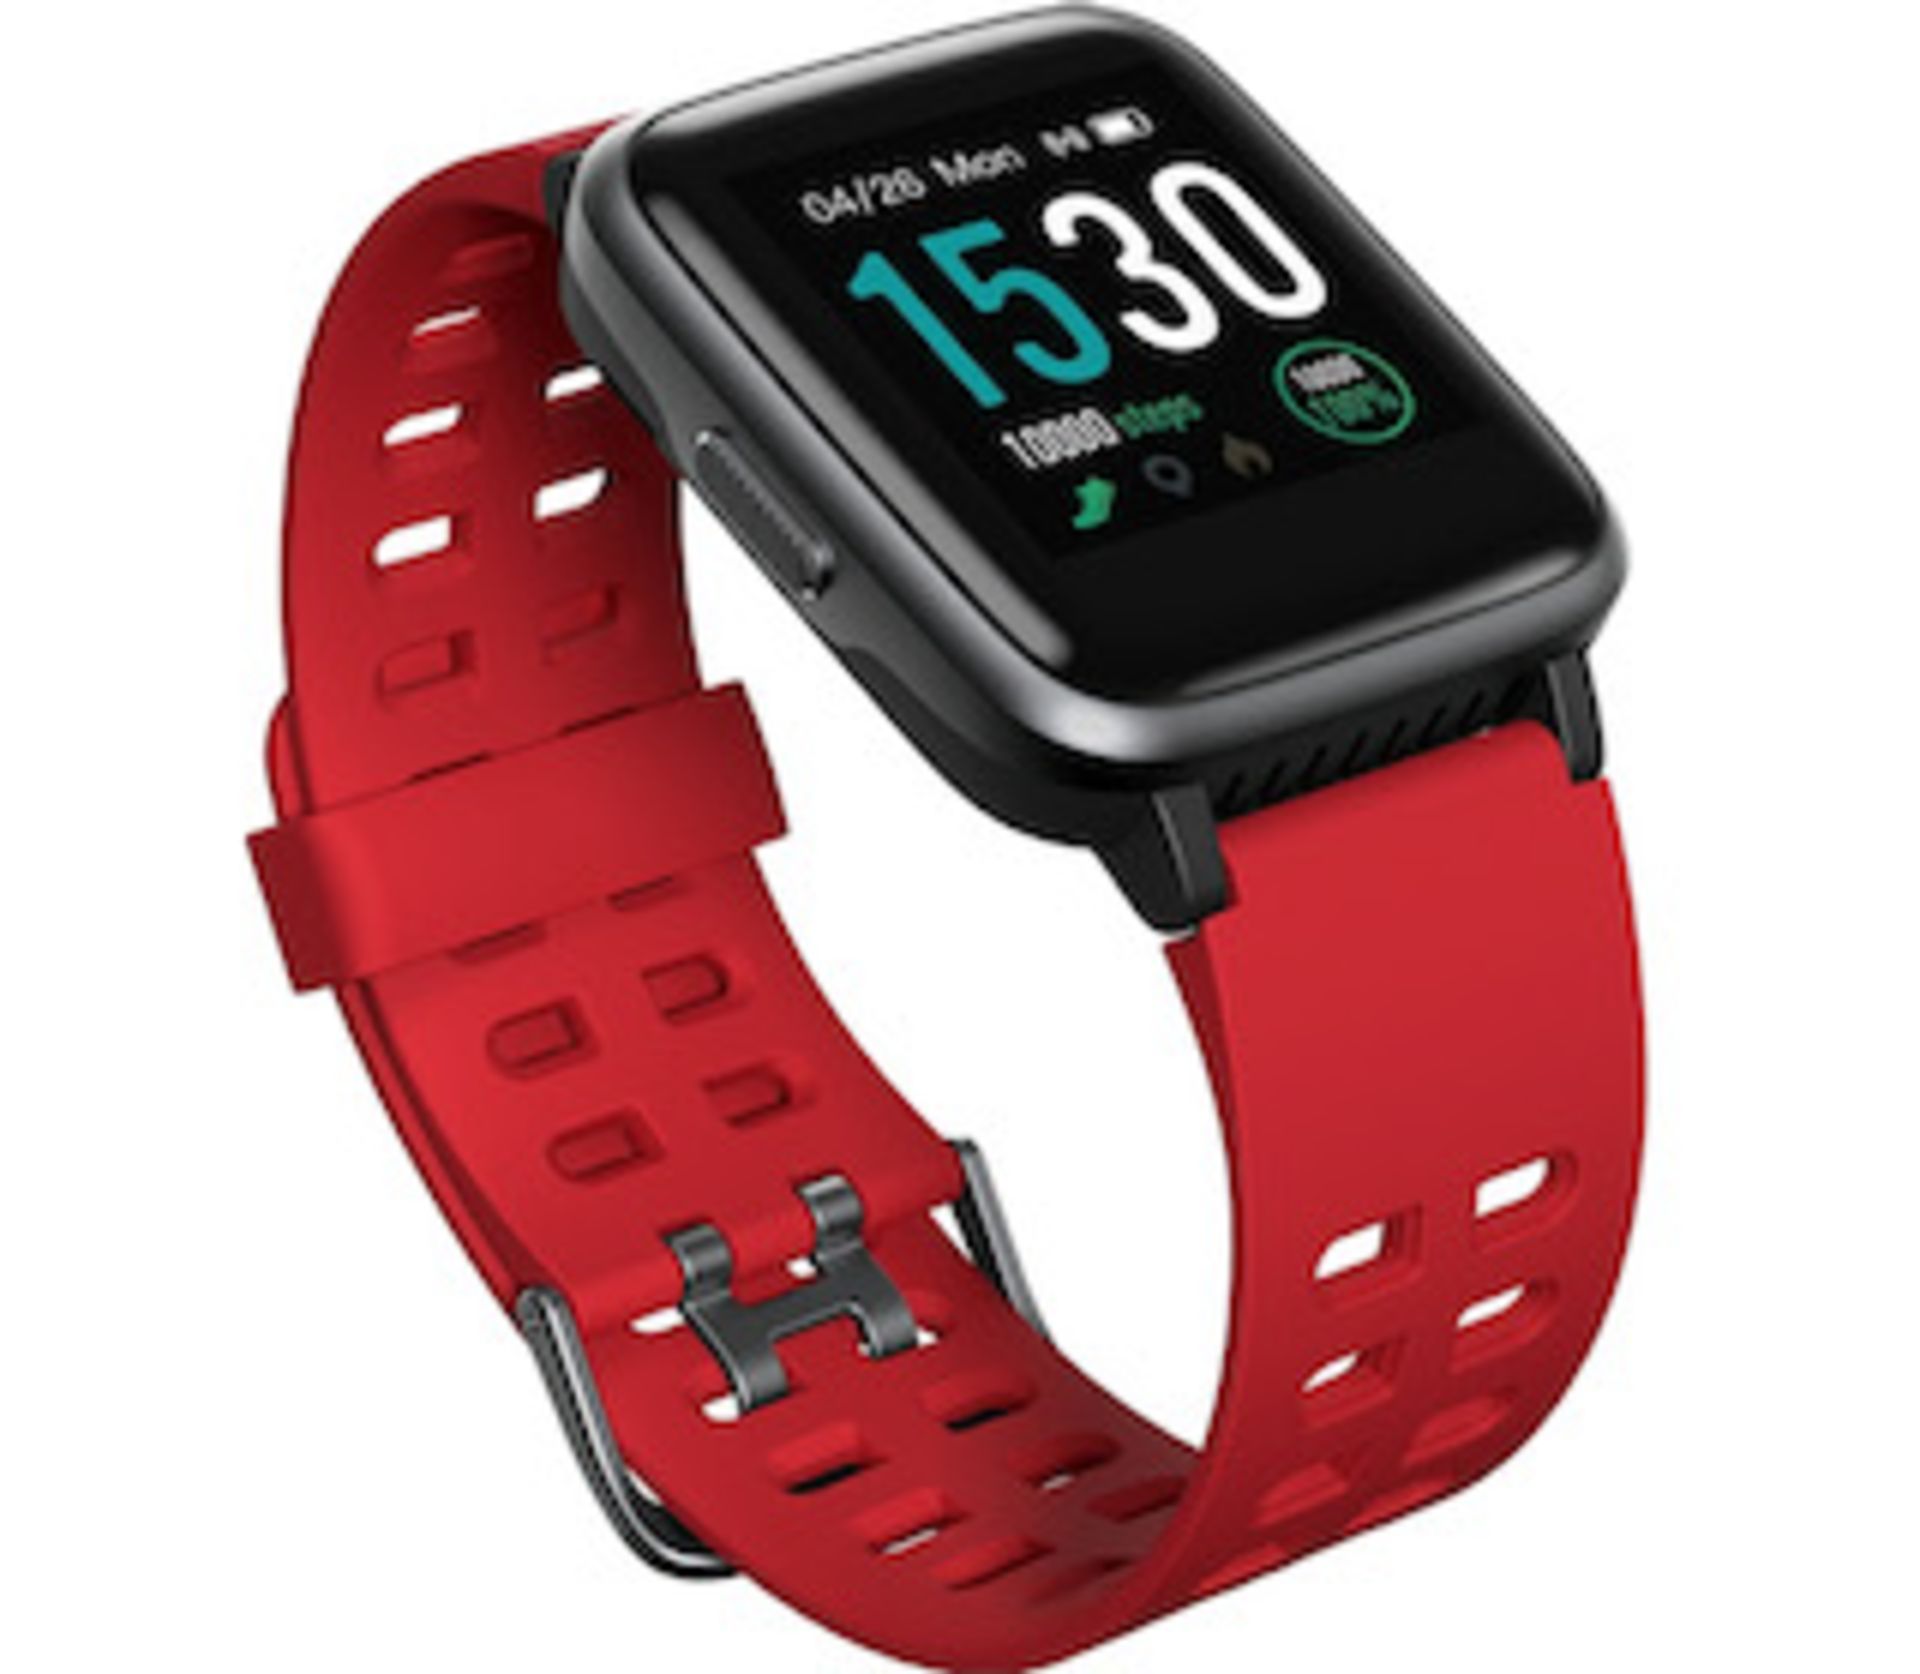 Brand New Unisex Fitness Tracker Watch Id205 Red Strap About This Item 1.3-Inch LCD Colour - Image 21 of 34